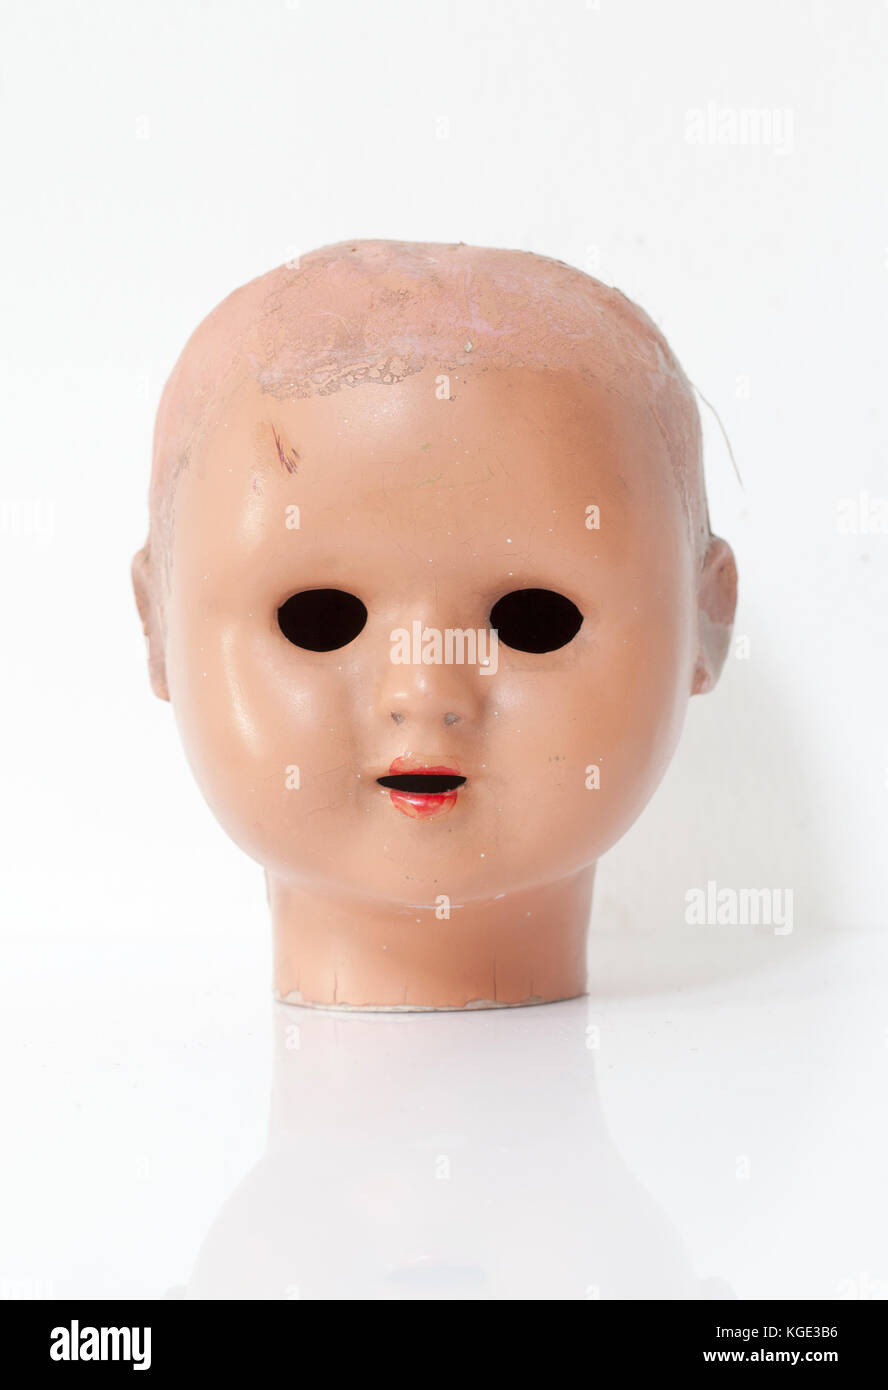 Creepy Baby Dolls Head against a white background Stock Photo